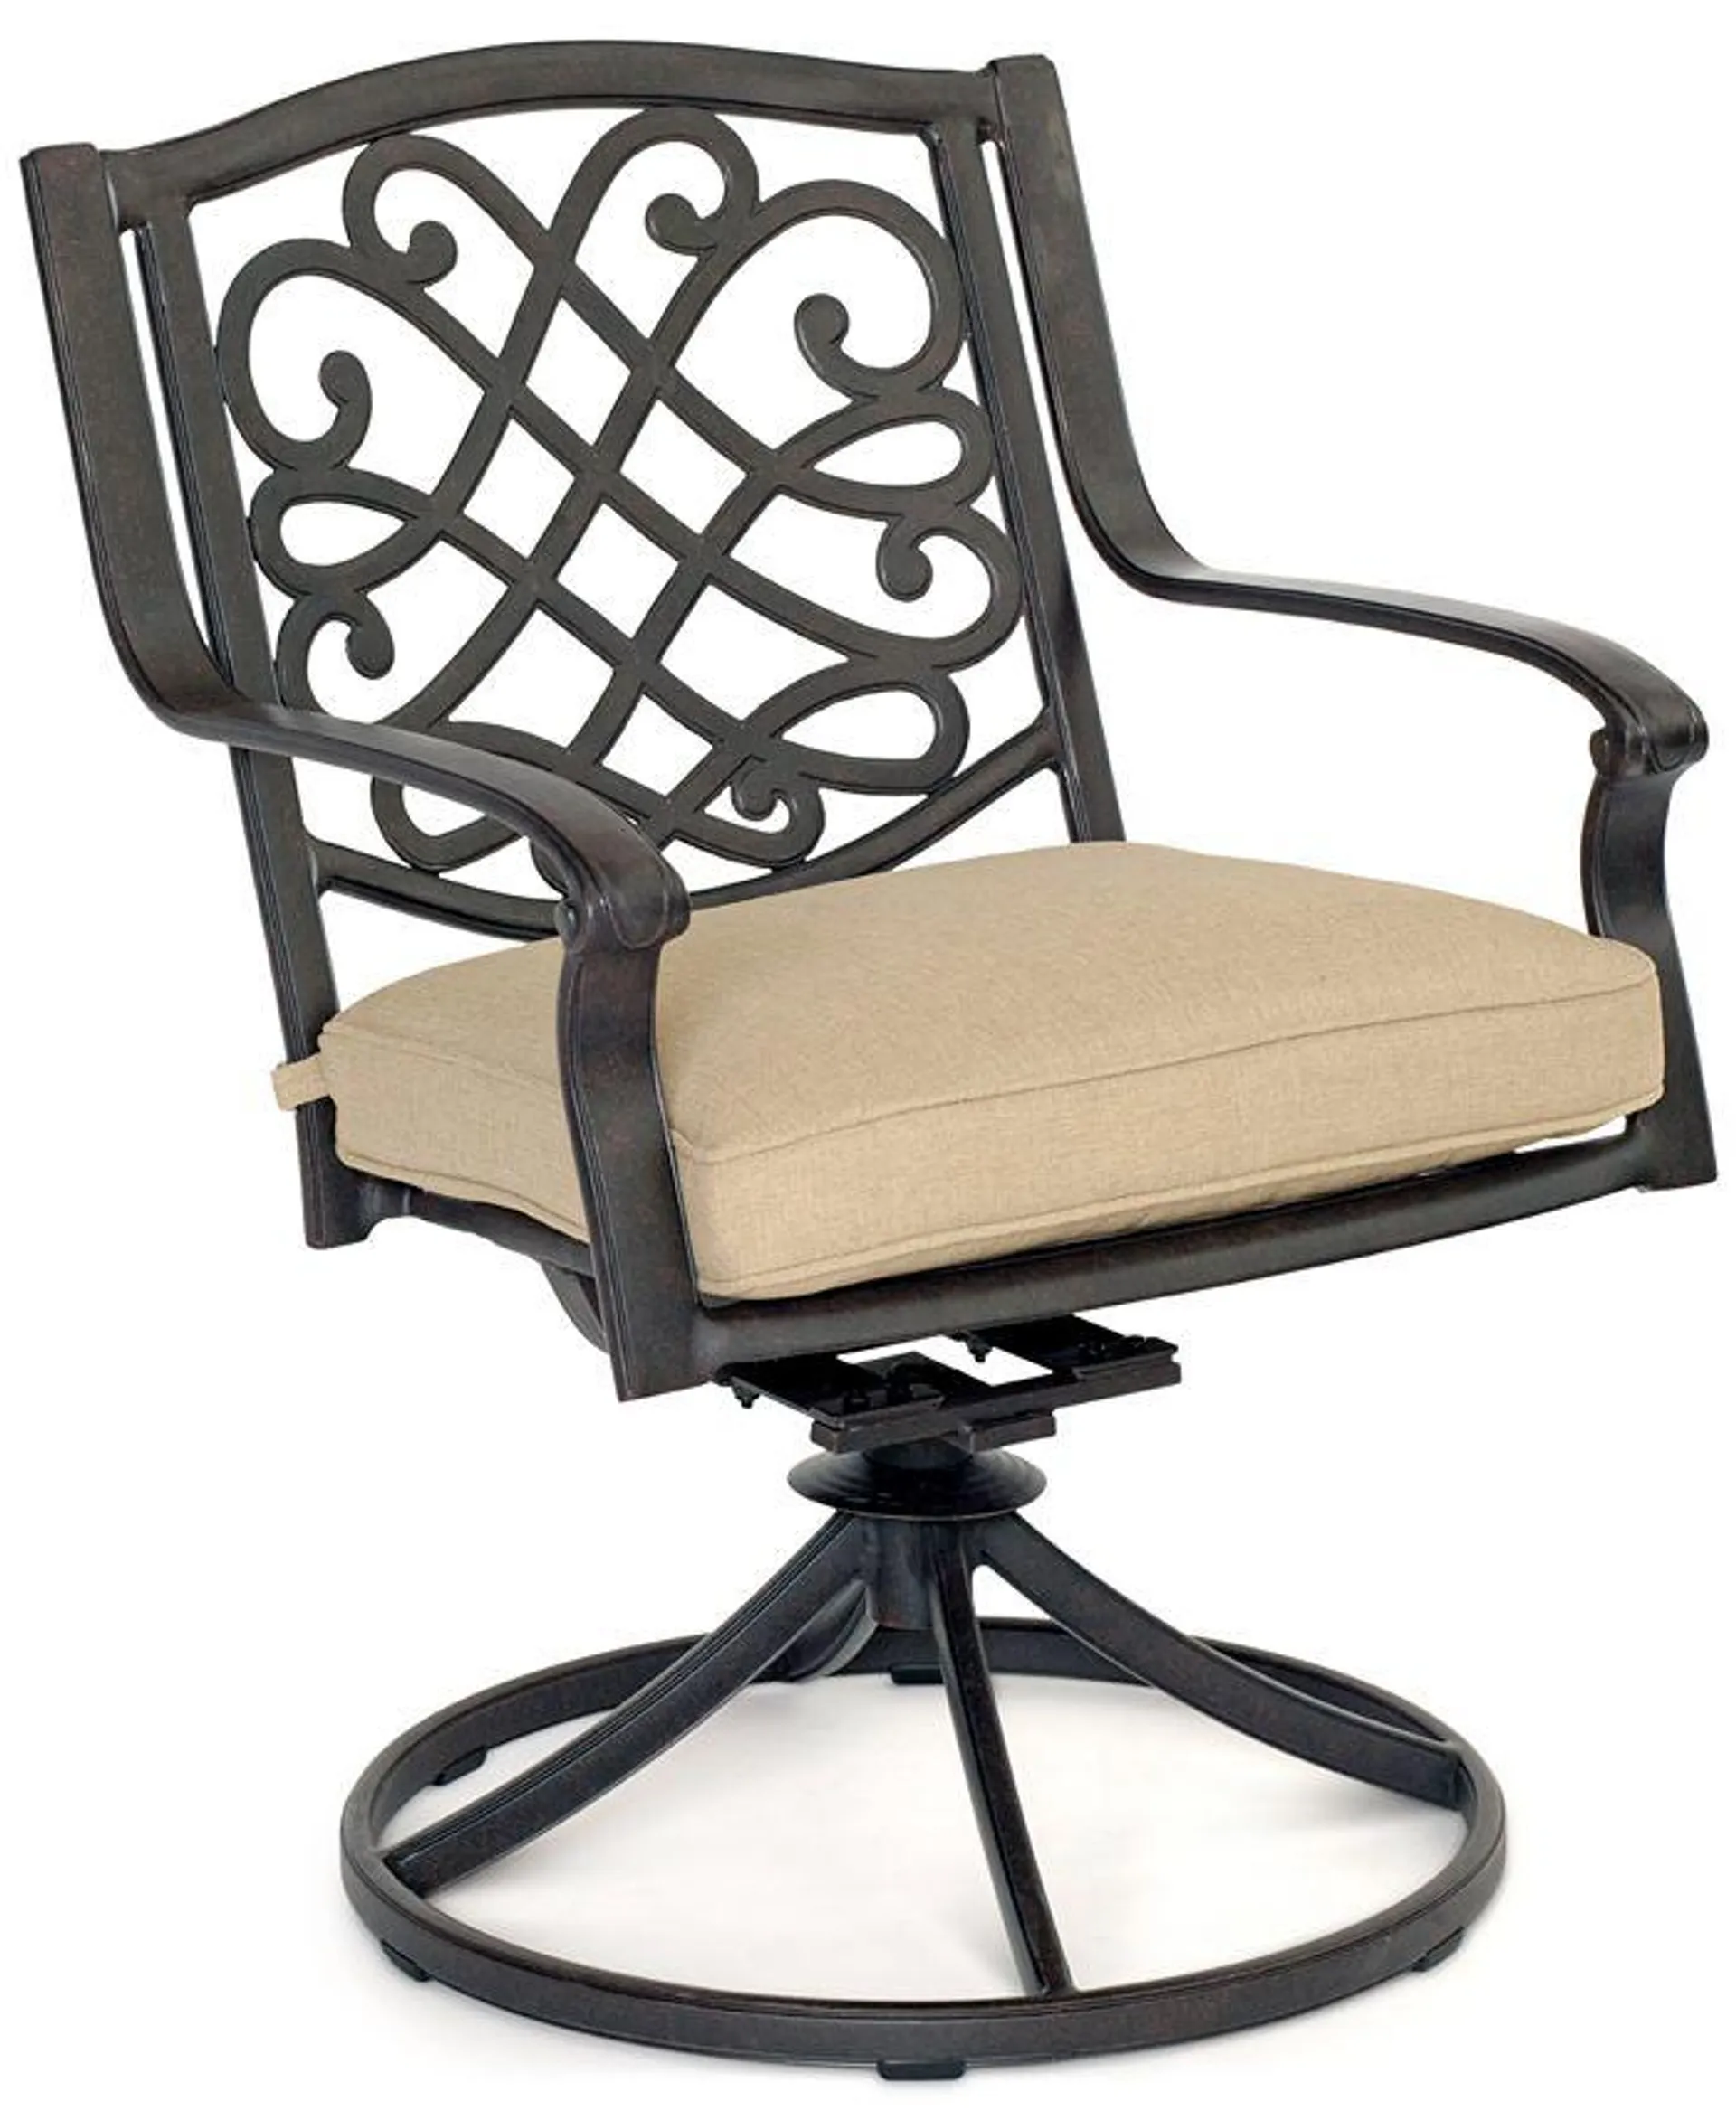 Set of 6 Park Gate Cast Aluminum Outdoor Dining Swivel Rockers, Created for Macy's